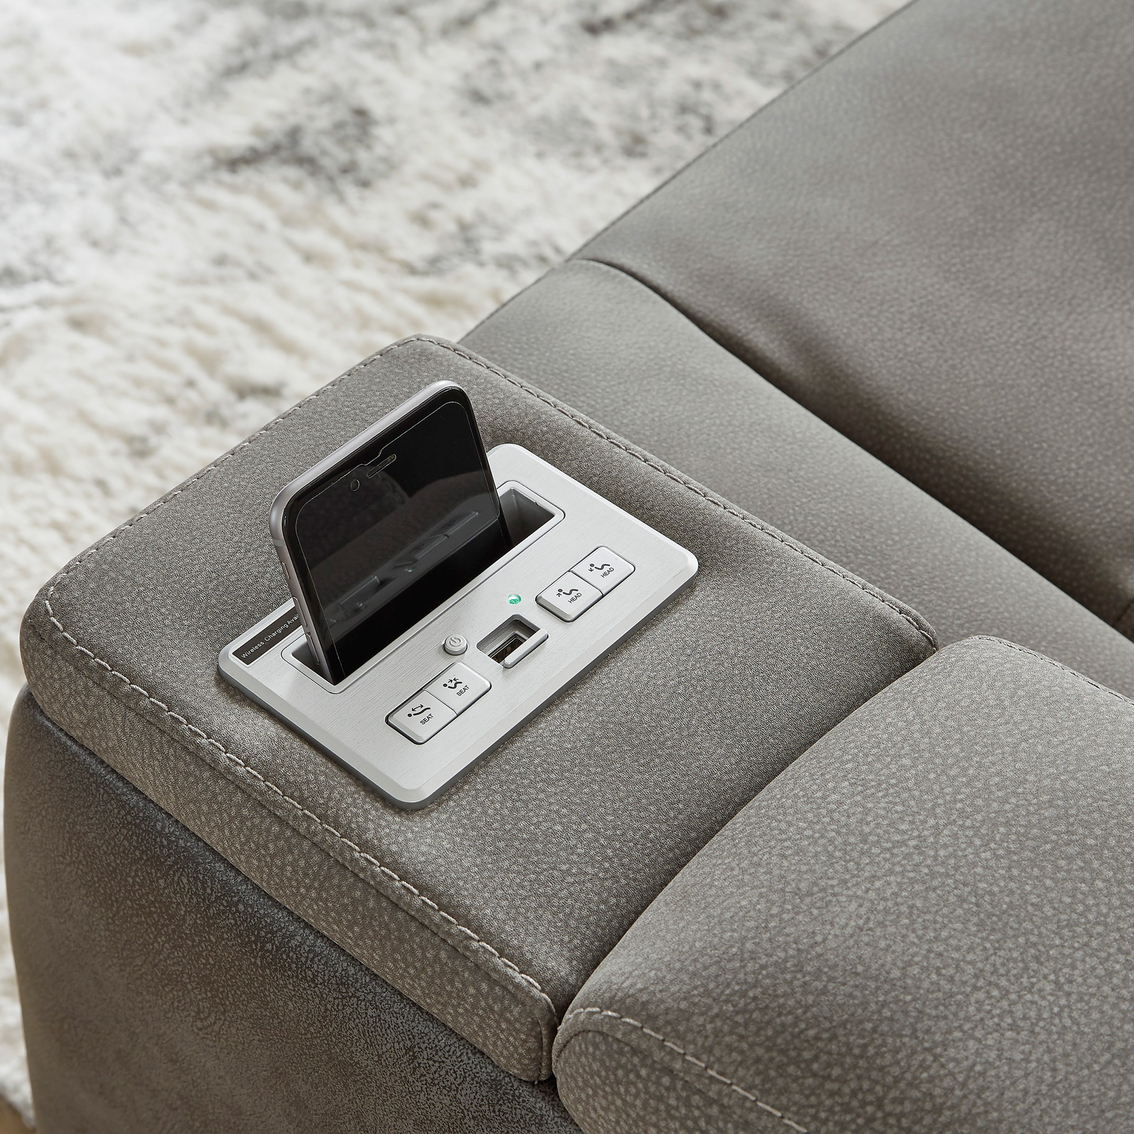 Signature Design by Ashley Next Gen DuraPella Power Reclining Loveseat with Console - Image 8 of 10